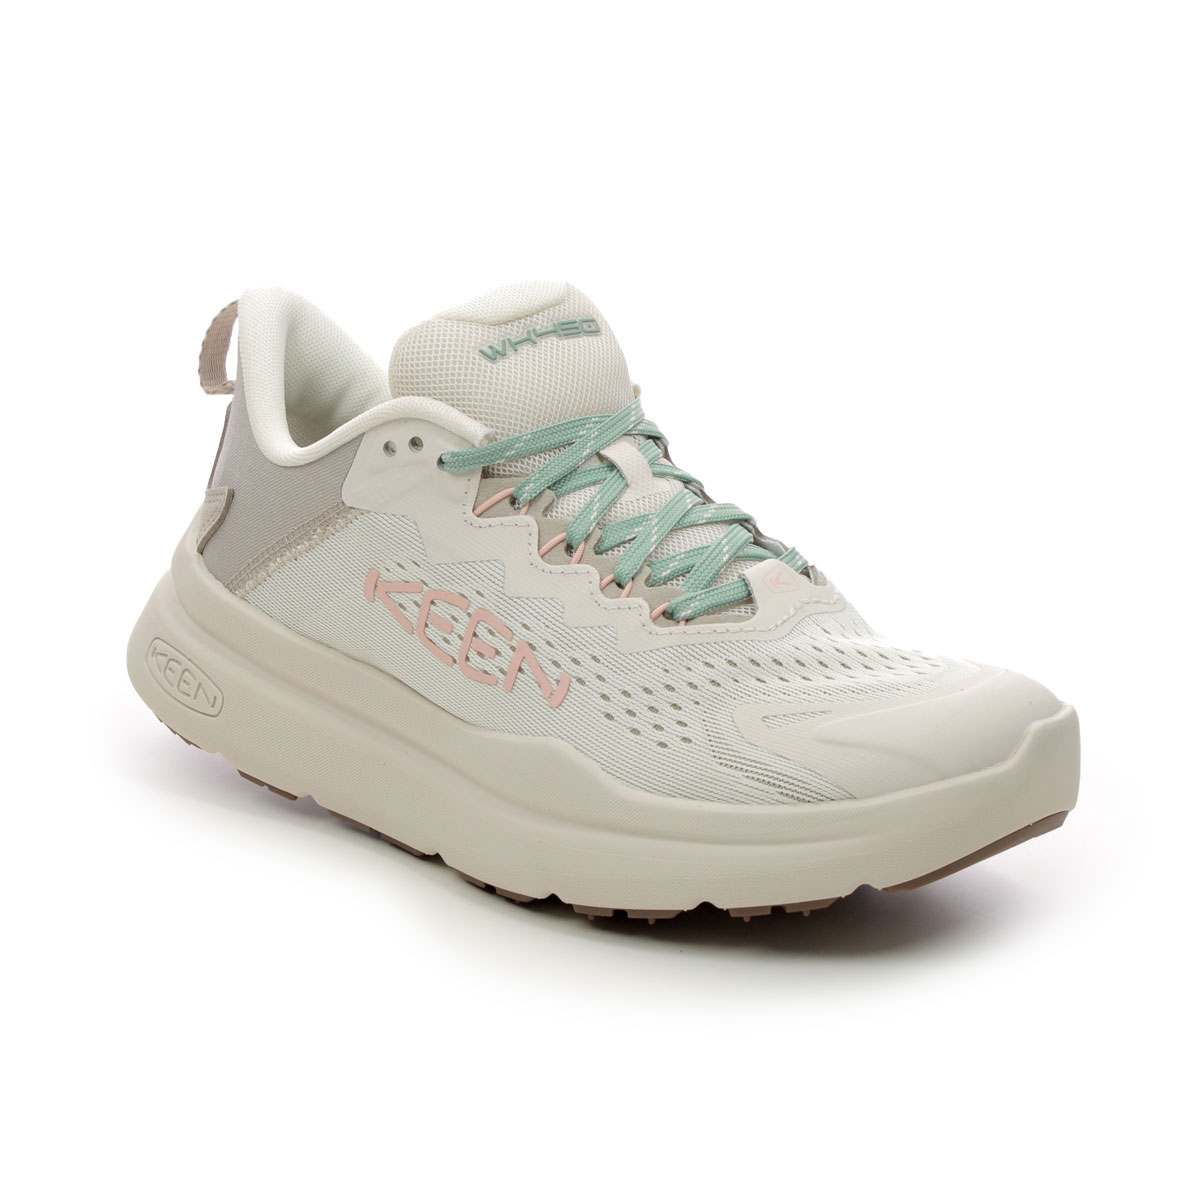 Keen Wk450 Rocker Off White Womens trainers 1028918- in a Plain Textile in Size 8